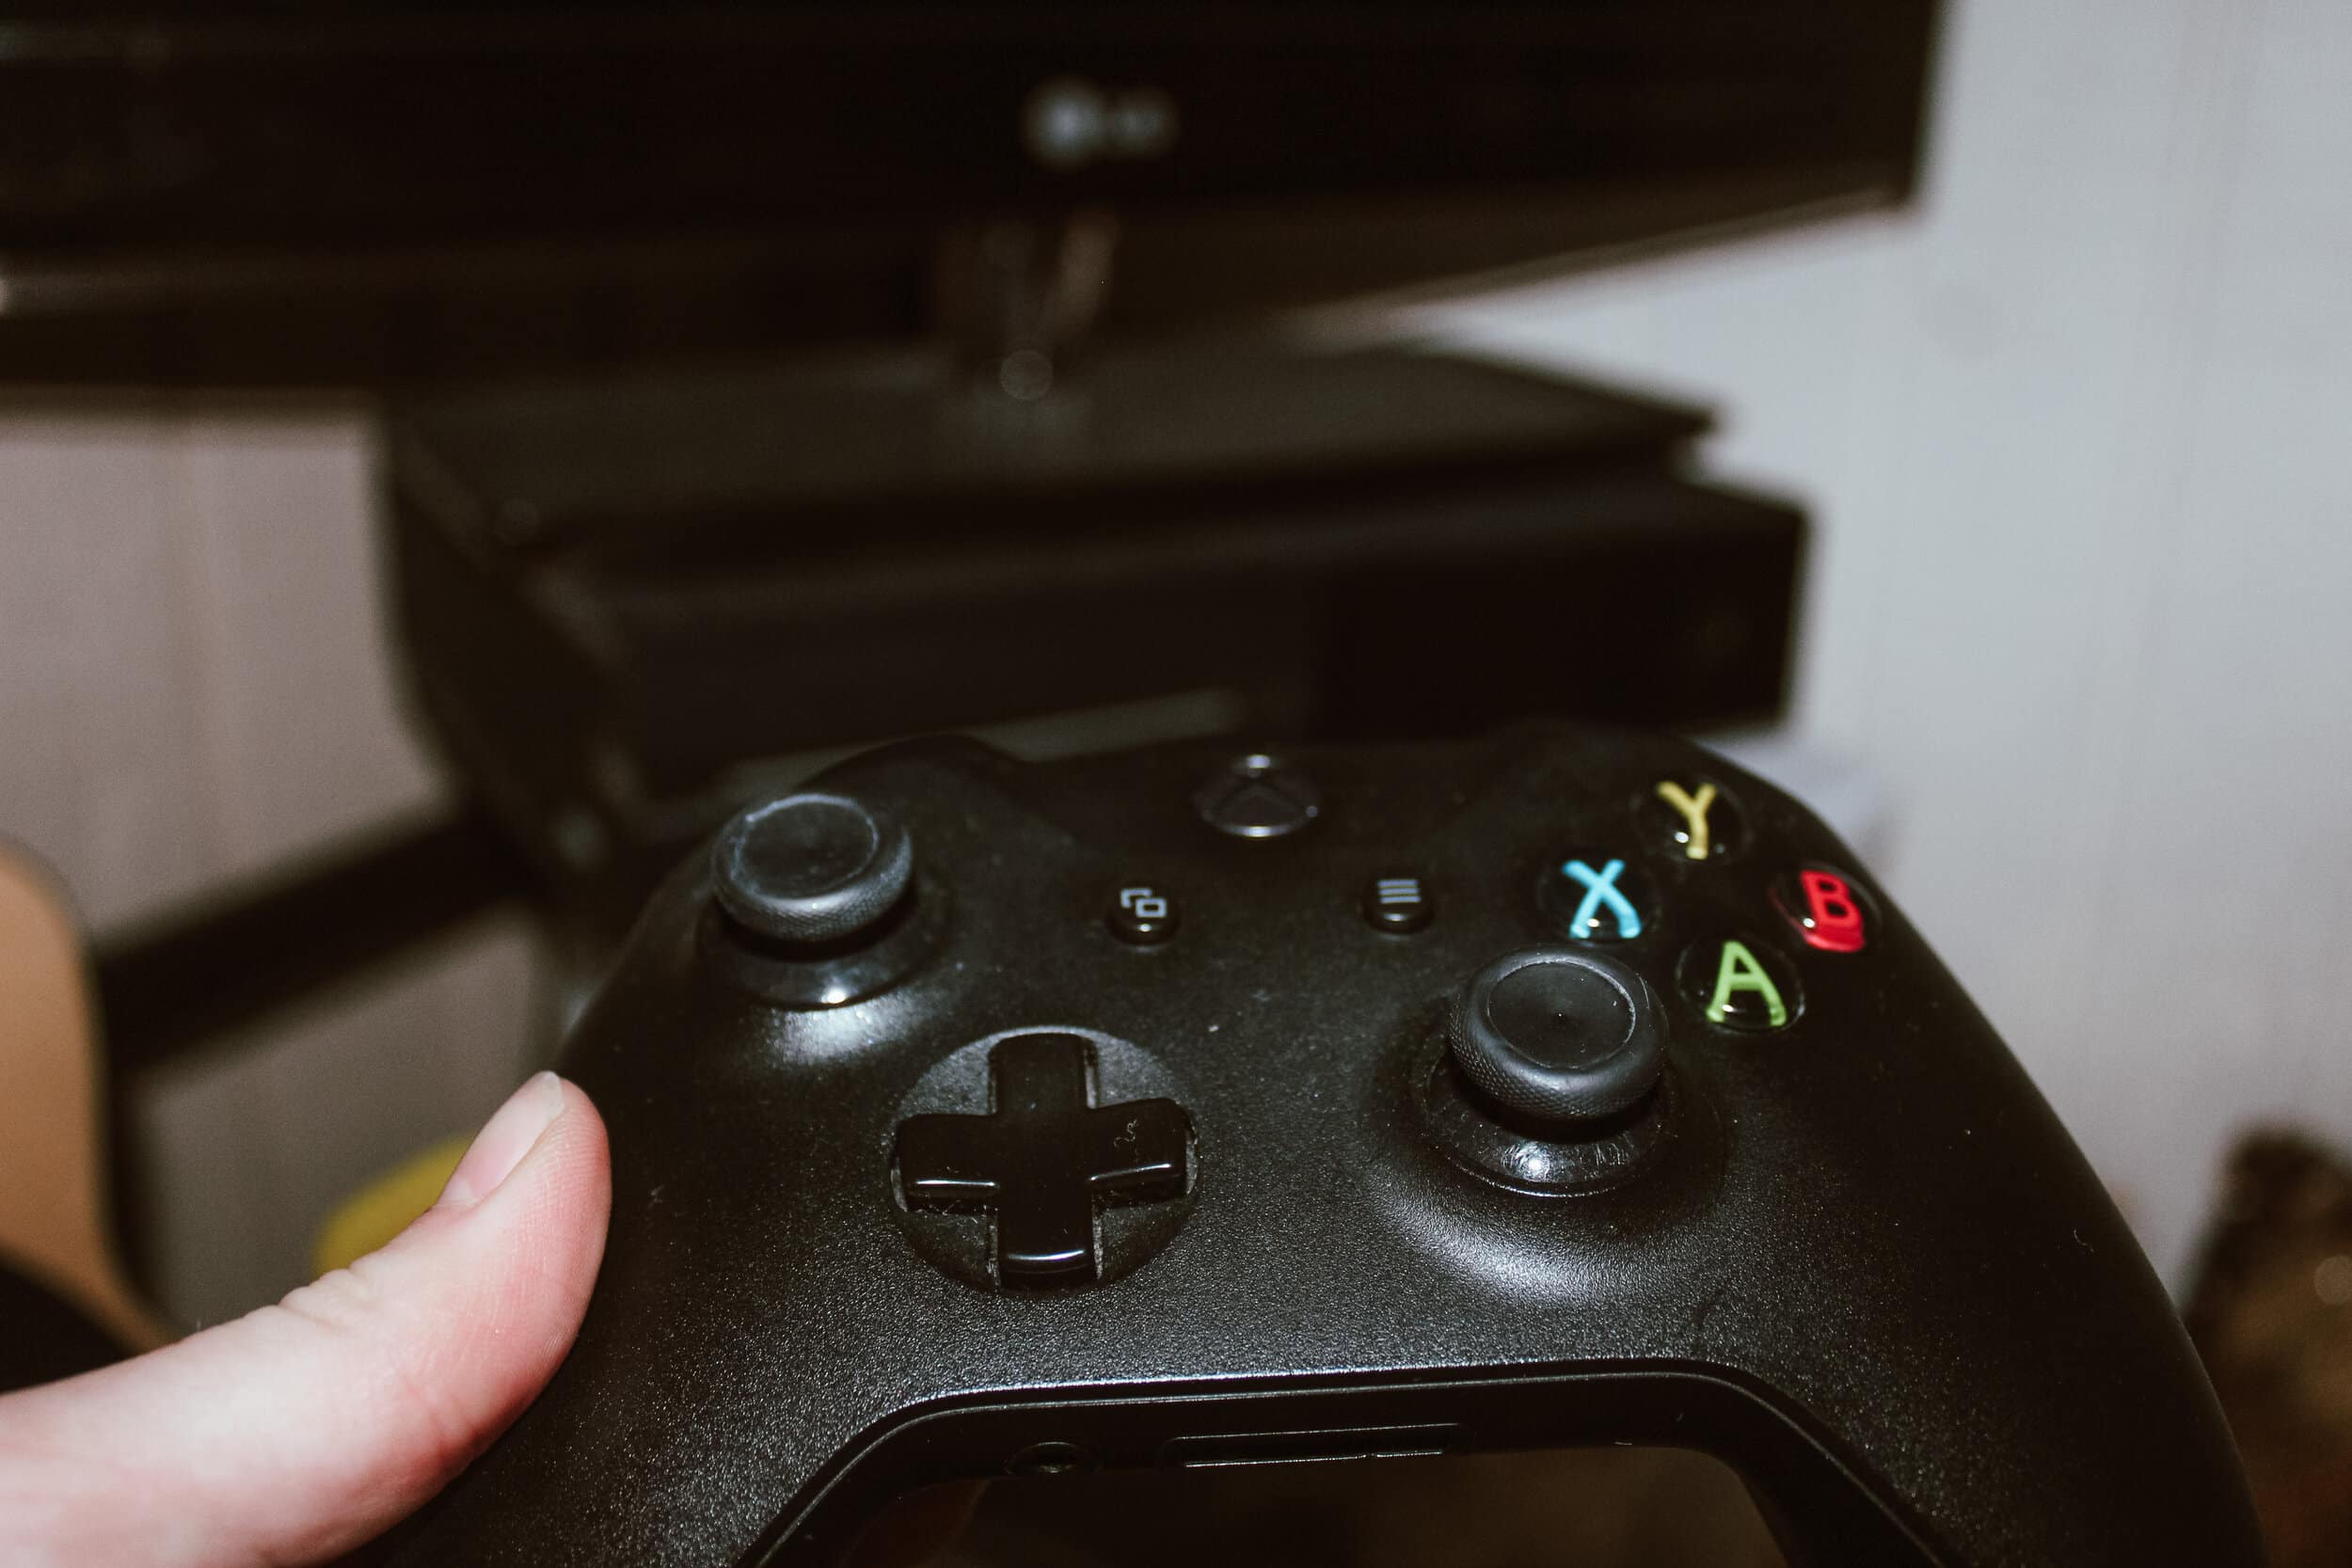 To kill time, some students in quarantine have picked up video gaming as a full-time hobby.